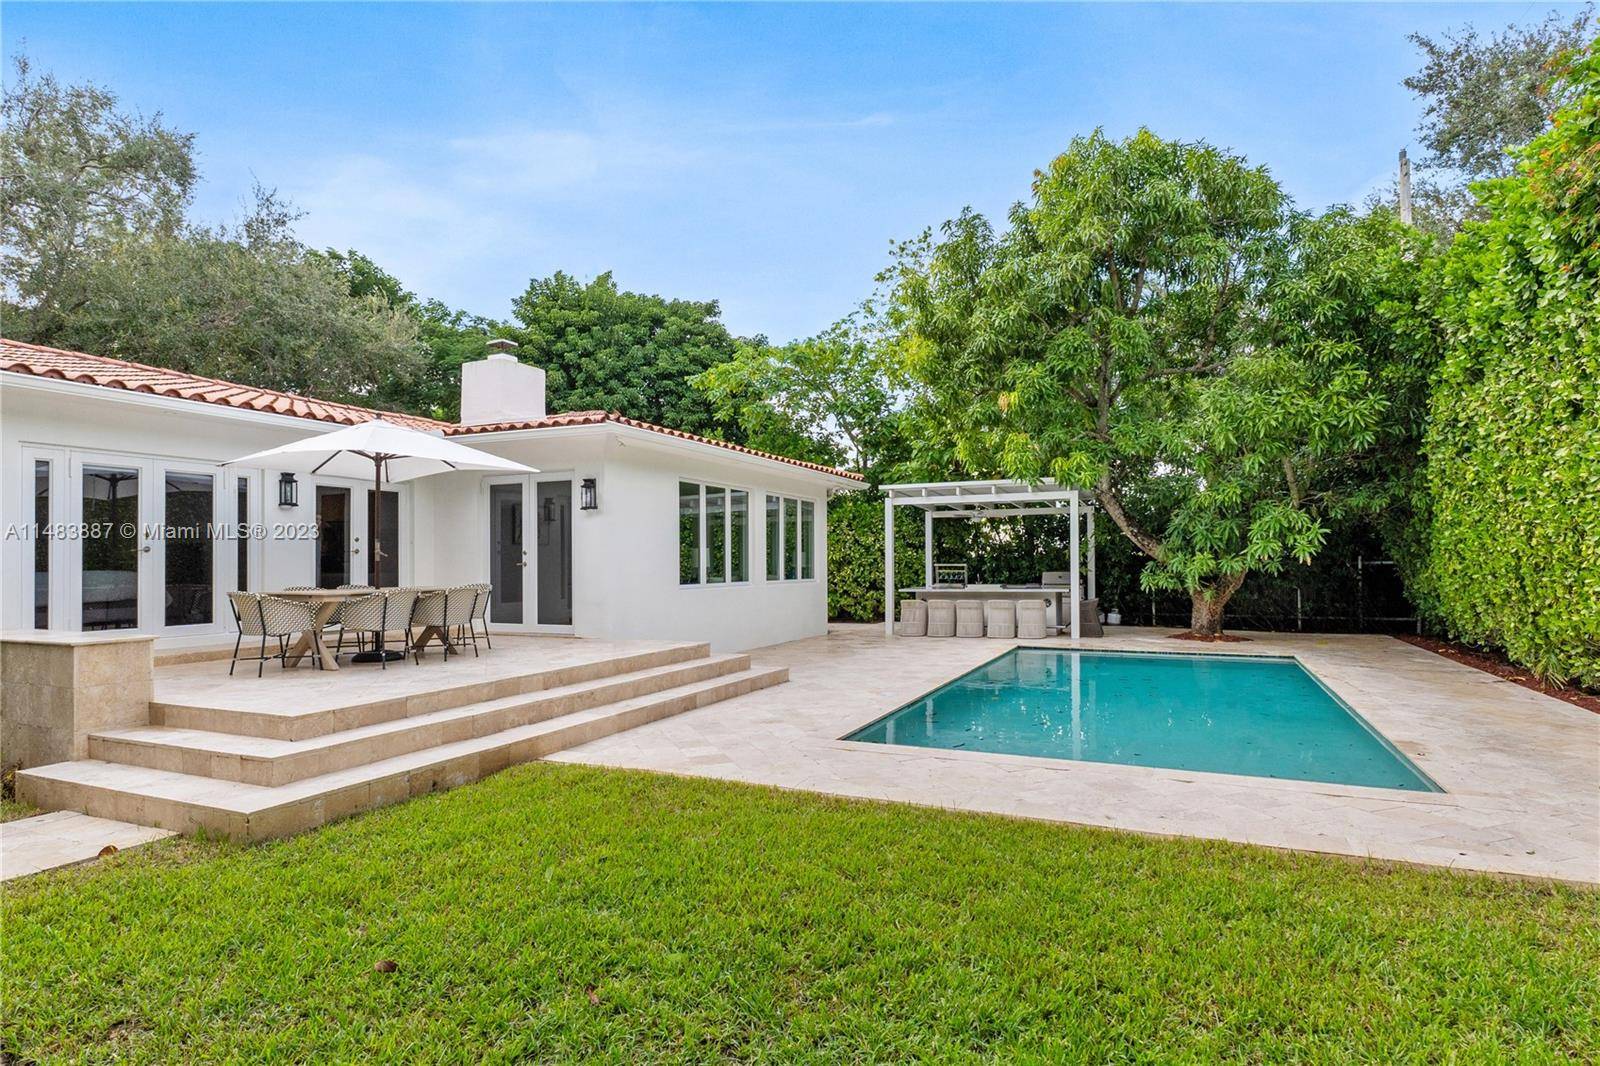 This charming home located in one of the best areas in Coral Gables comes fully furnished.